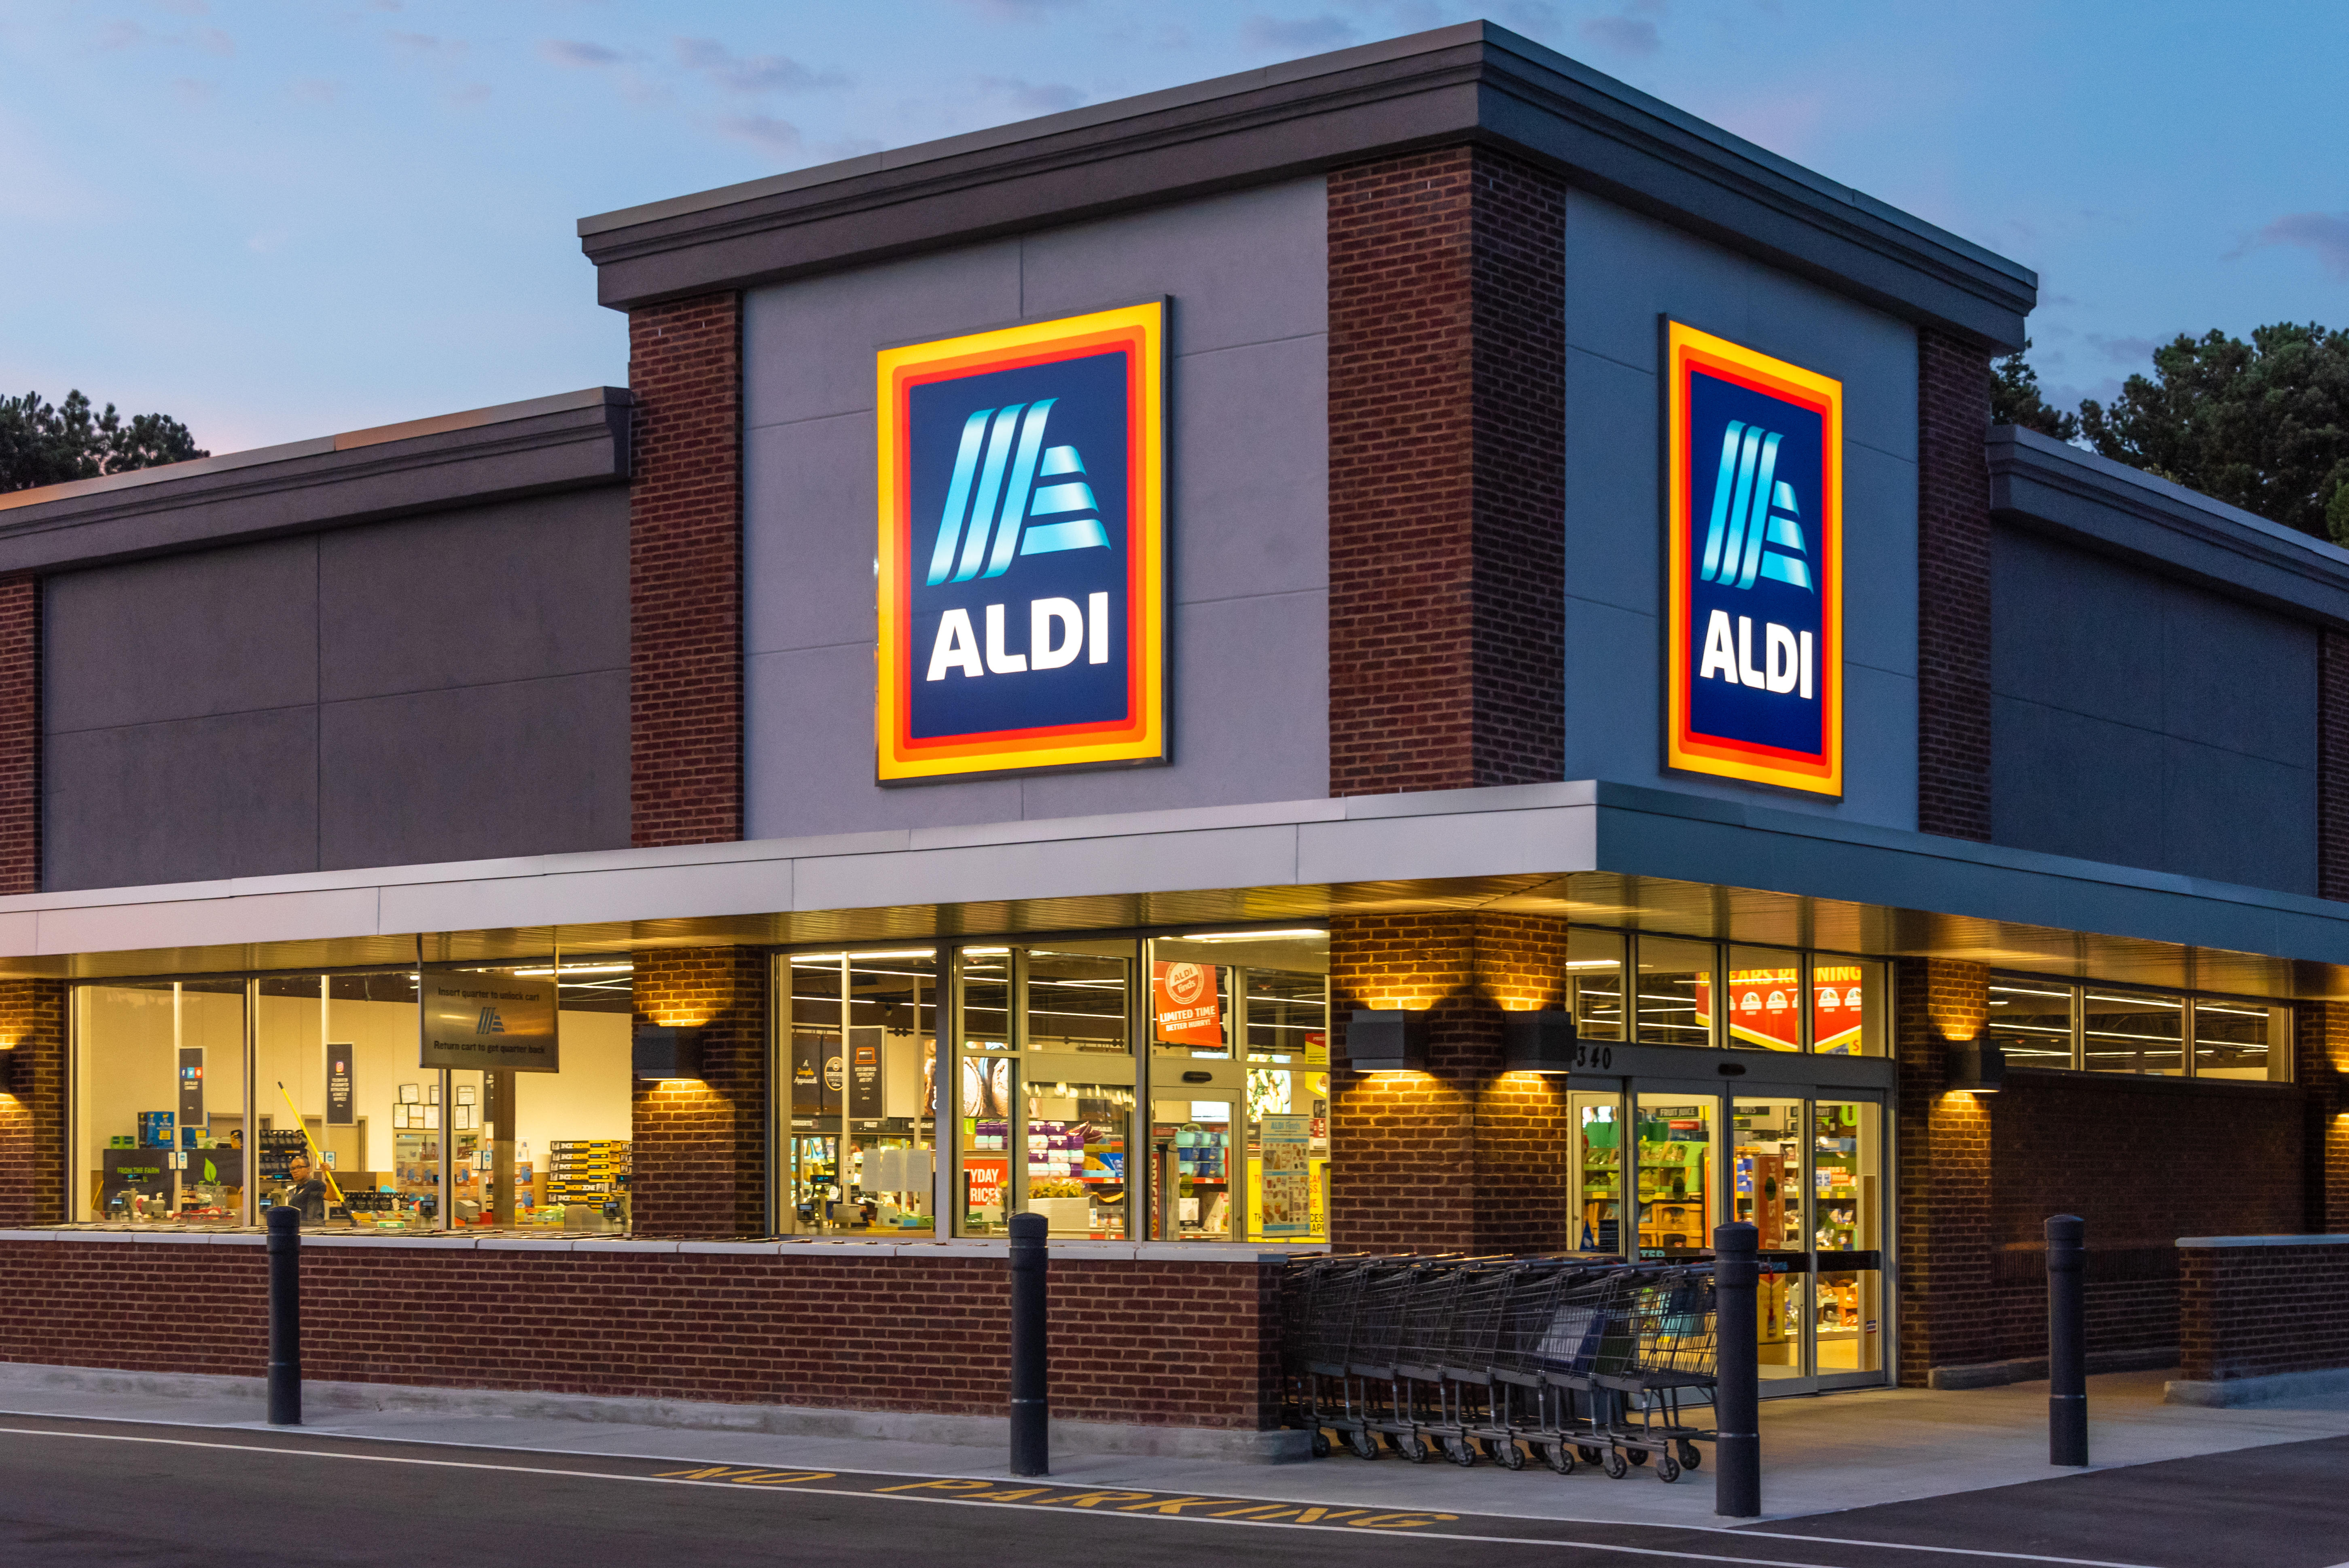 Aldi has a reputation for being a budget supermarket and customers can lower prices even more